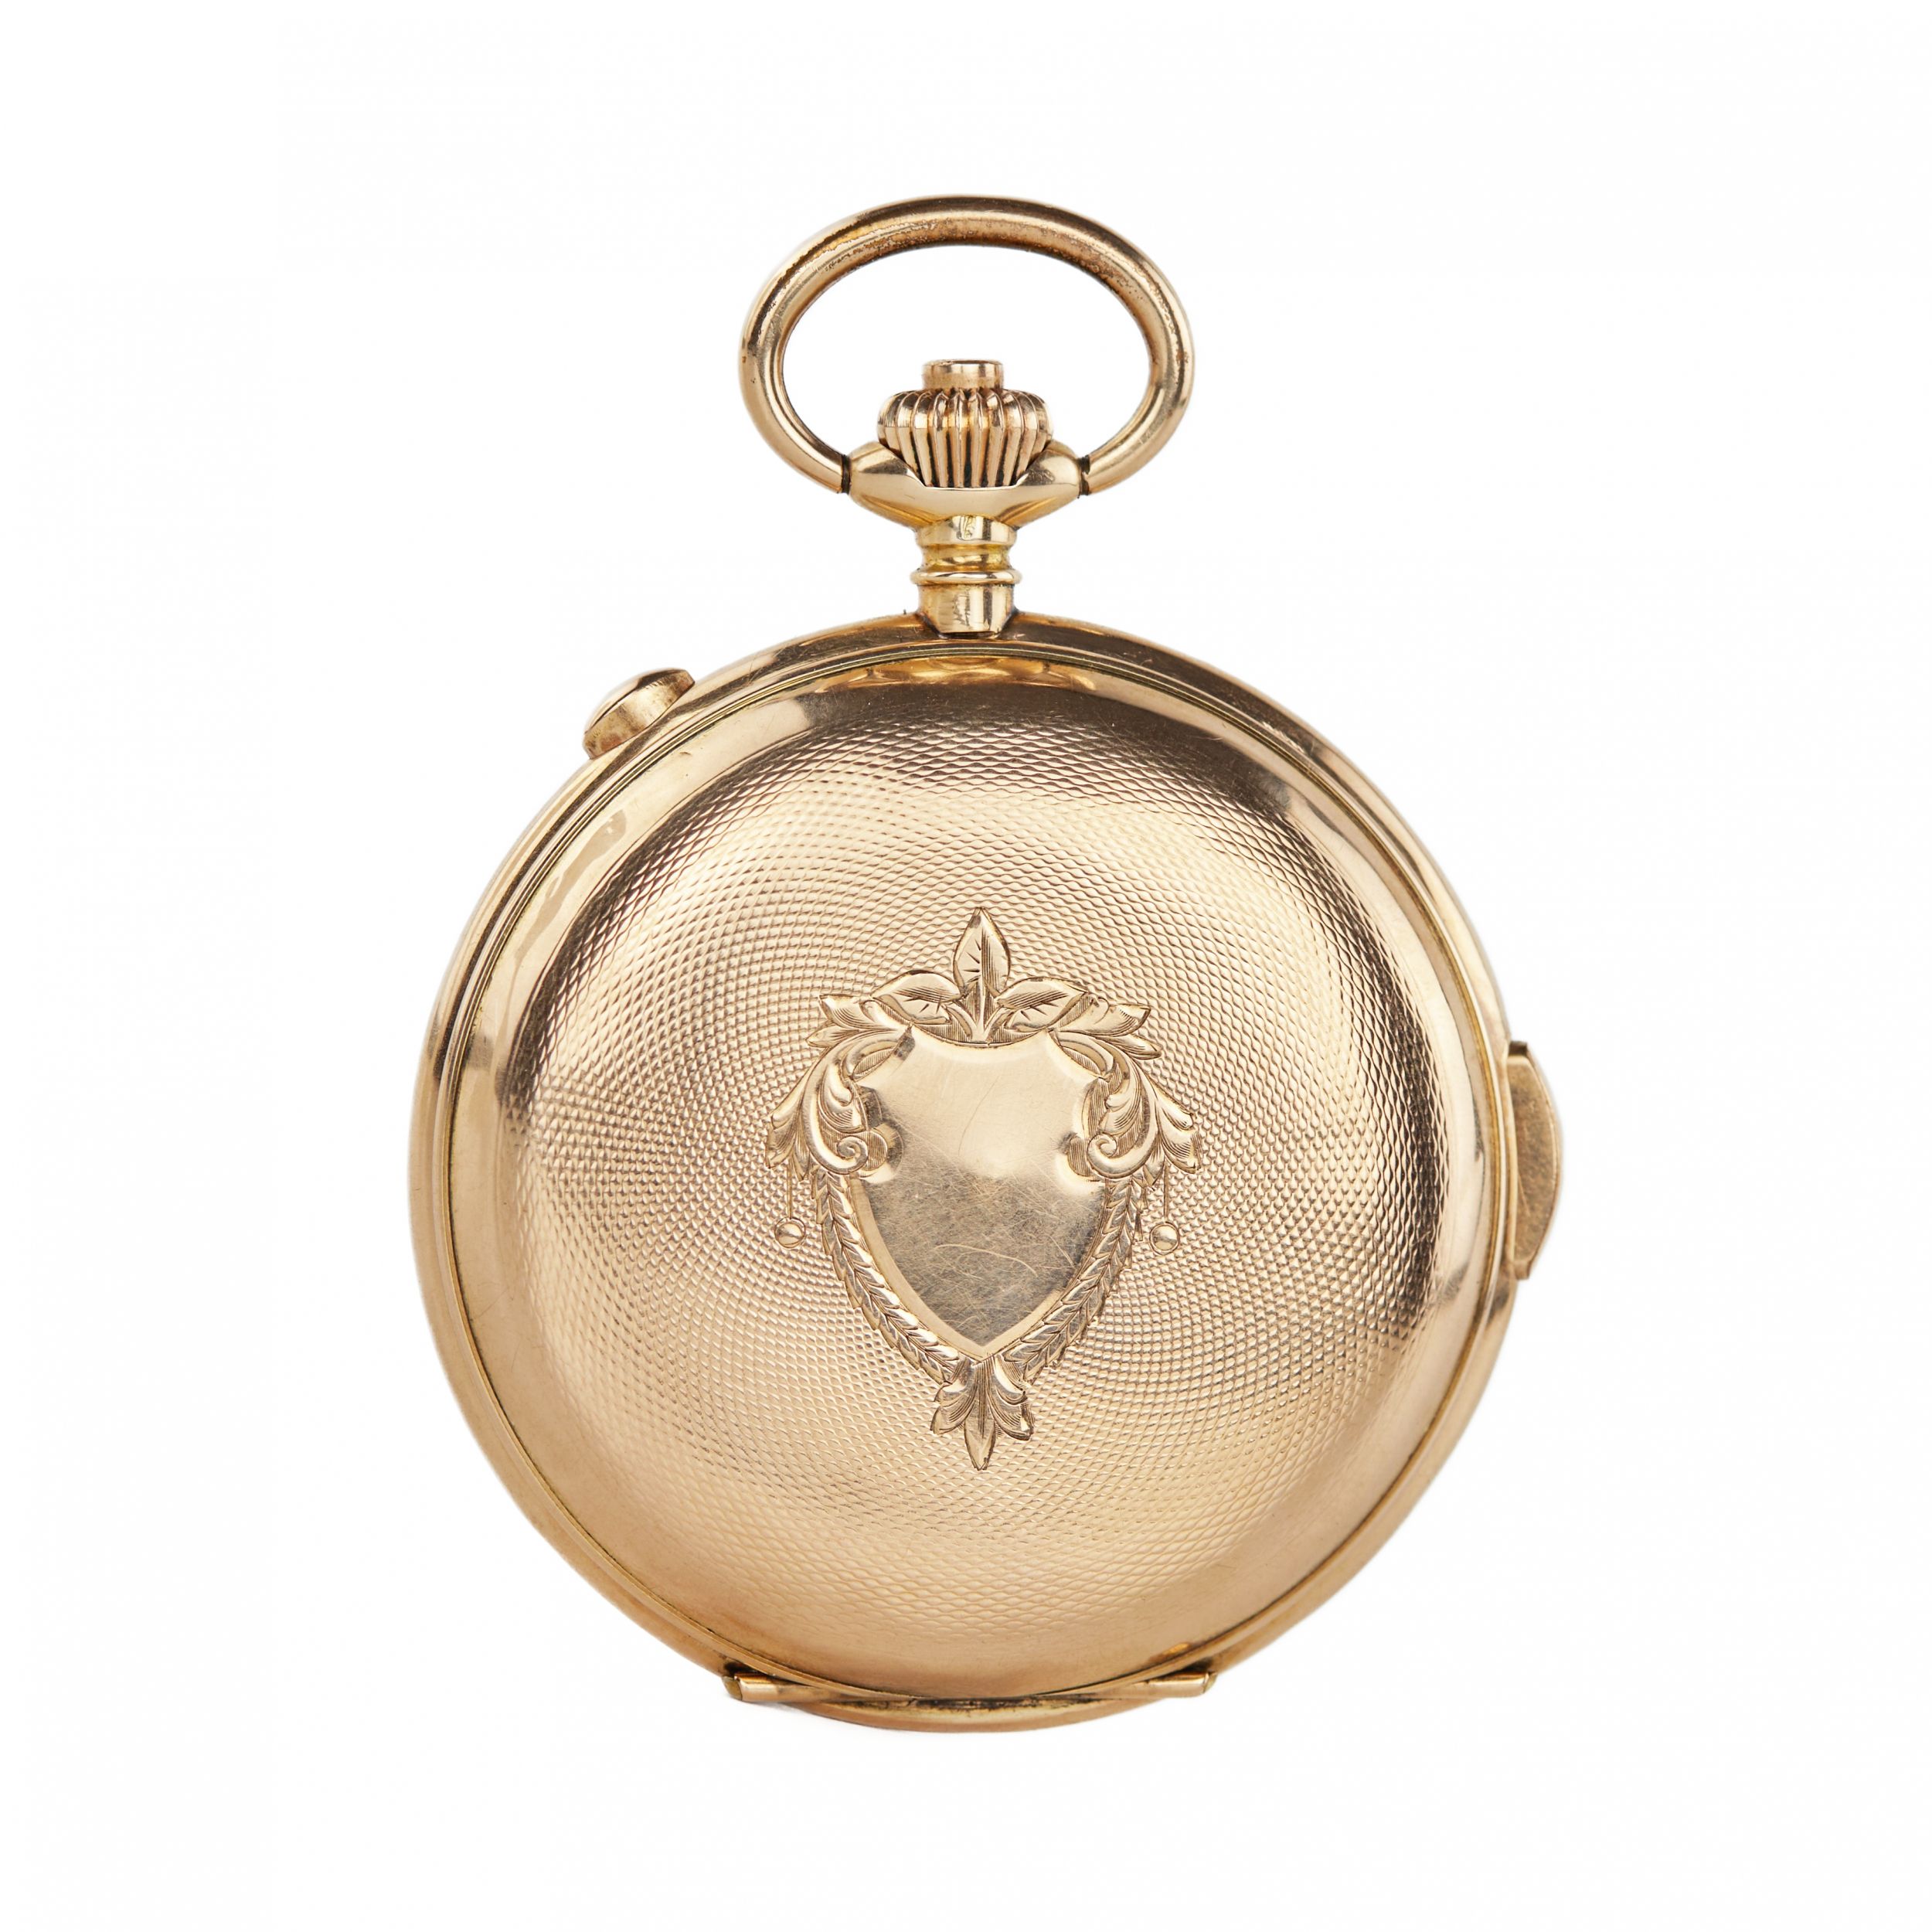 Heures Repetition Quarts Taschenuhr Chronographe 14k Gold Pocket Watch - Image 3 of 11